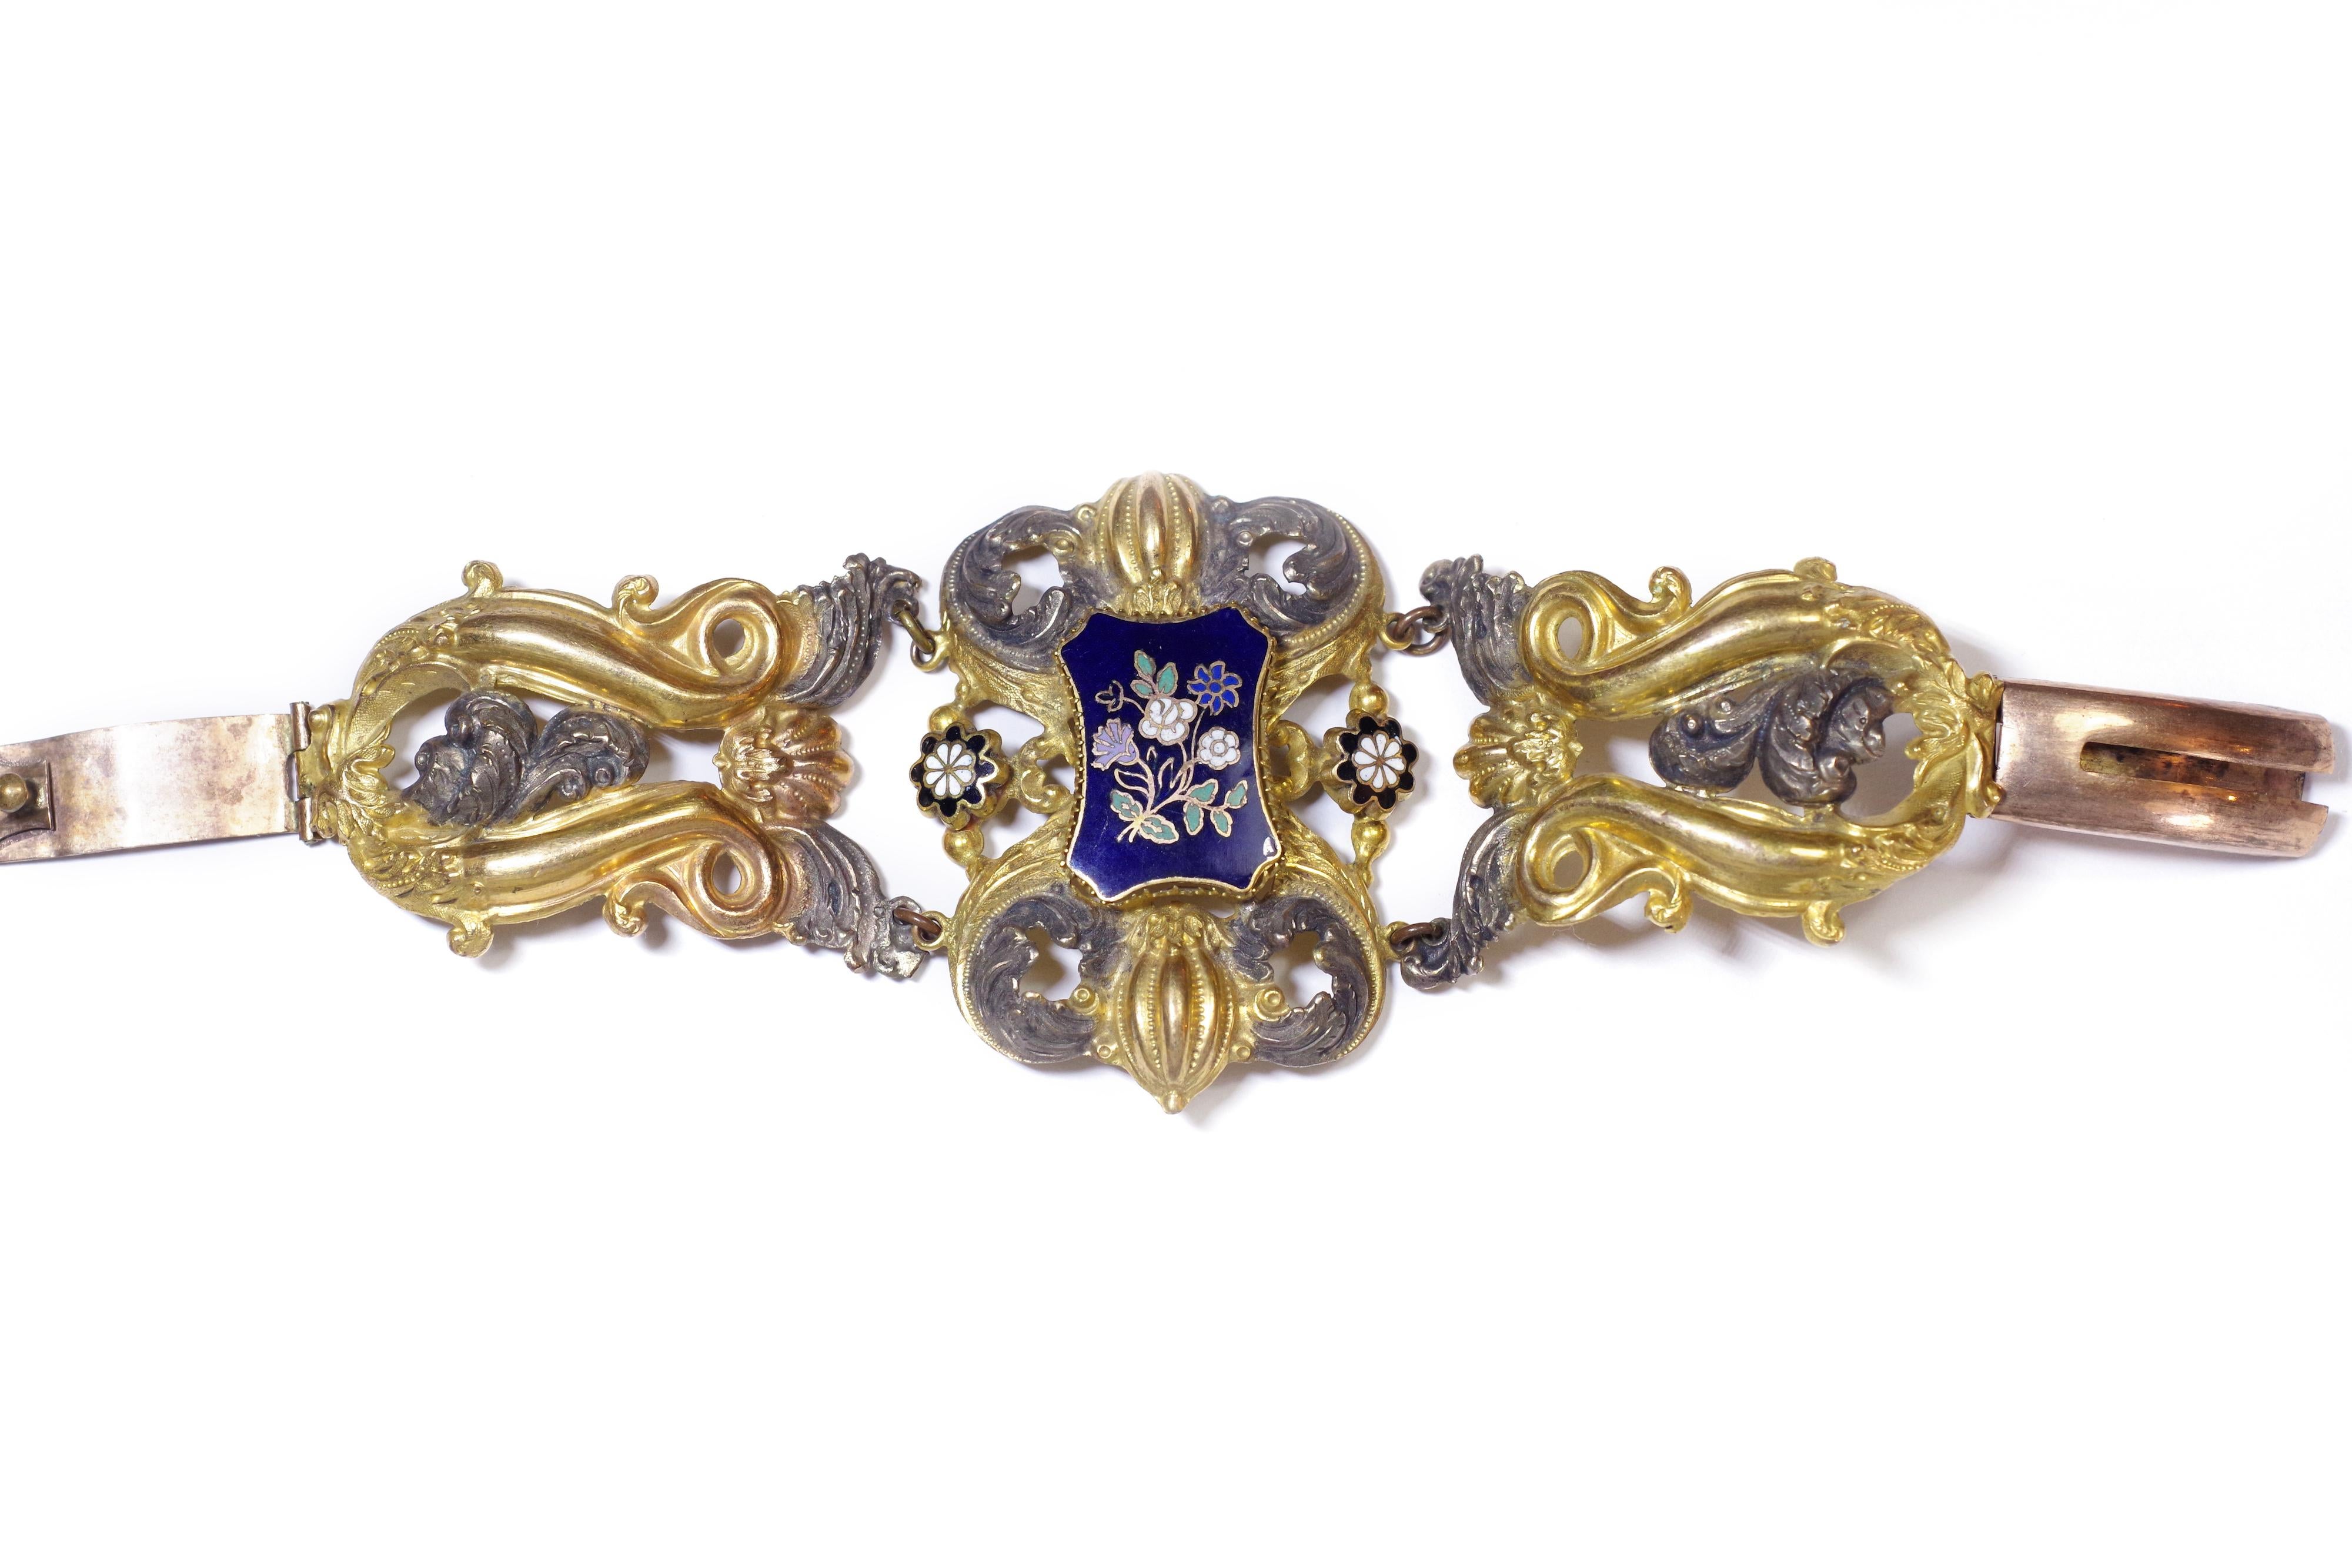 Women's or Men's Early Victorian French Pinchbeck Bracelet Multicolored Gilded Metal